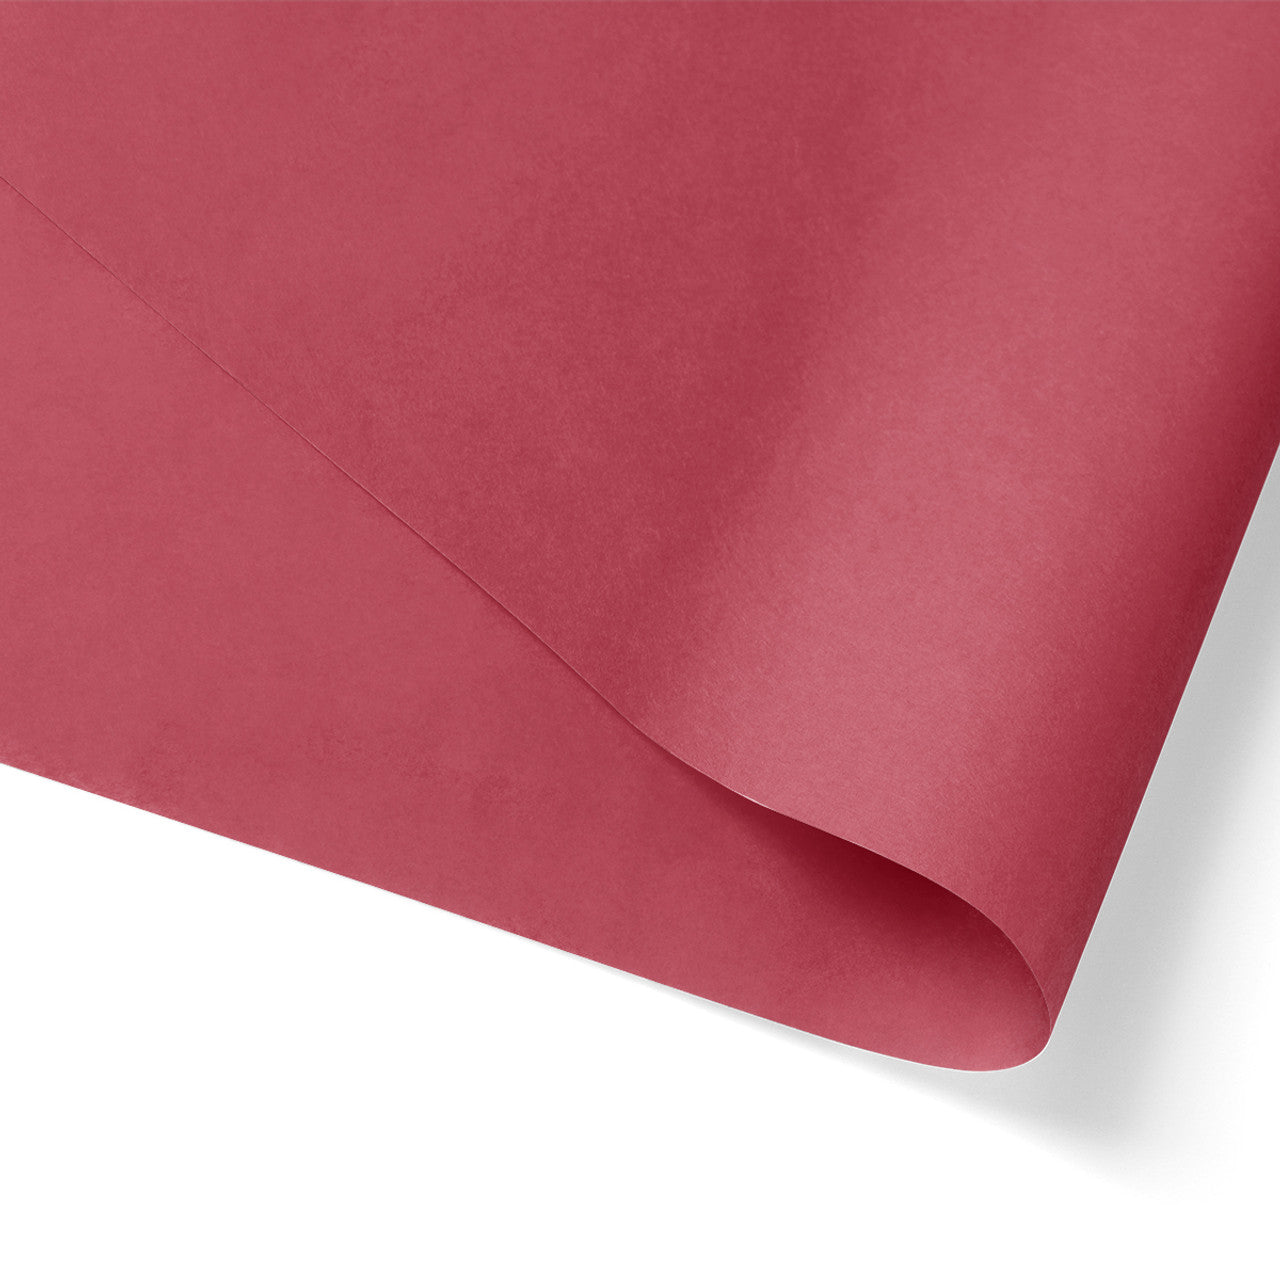 480pcs 20x30 inches Red Solid Tissue Paper; $0.05/pc